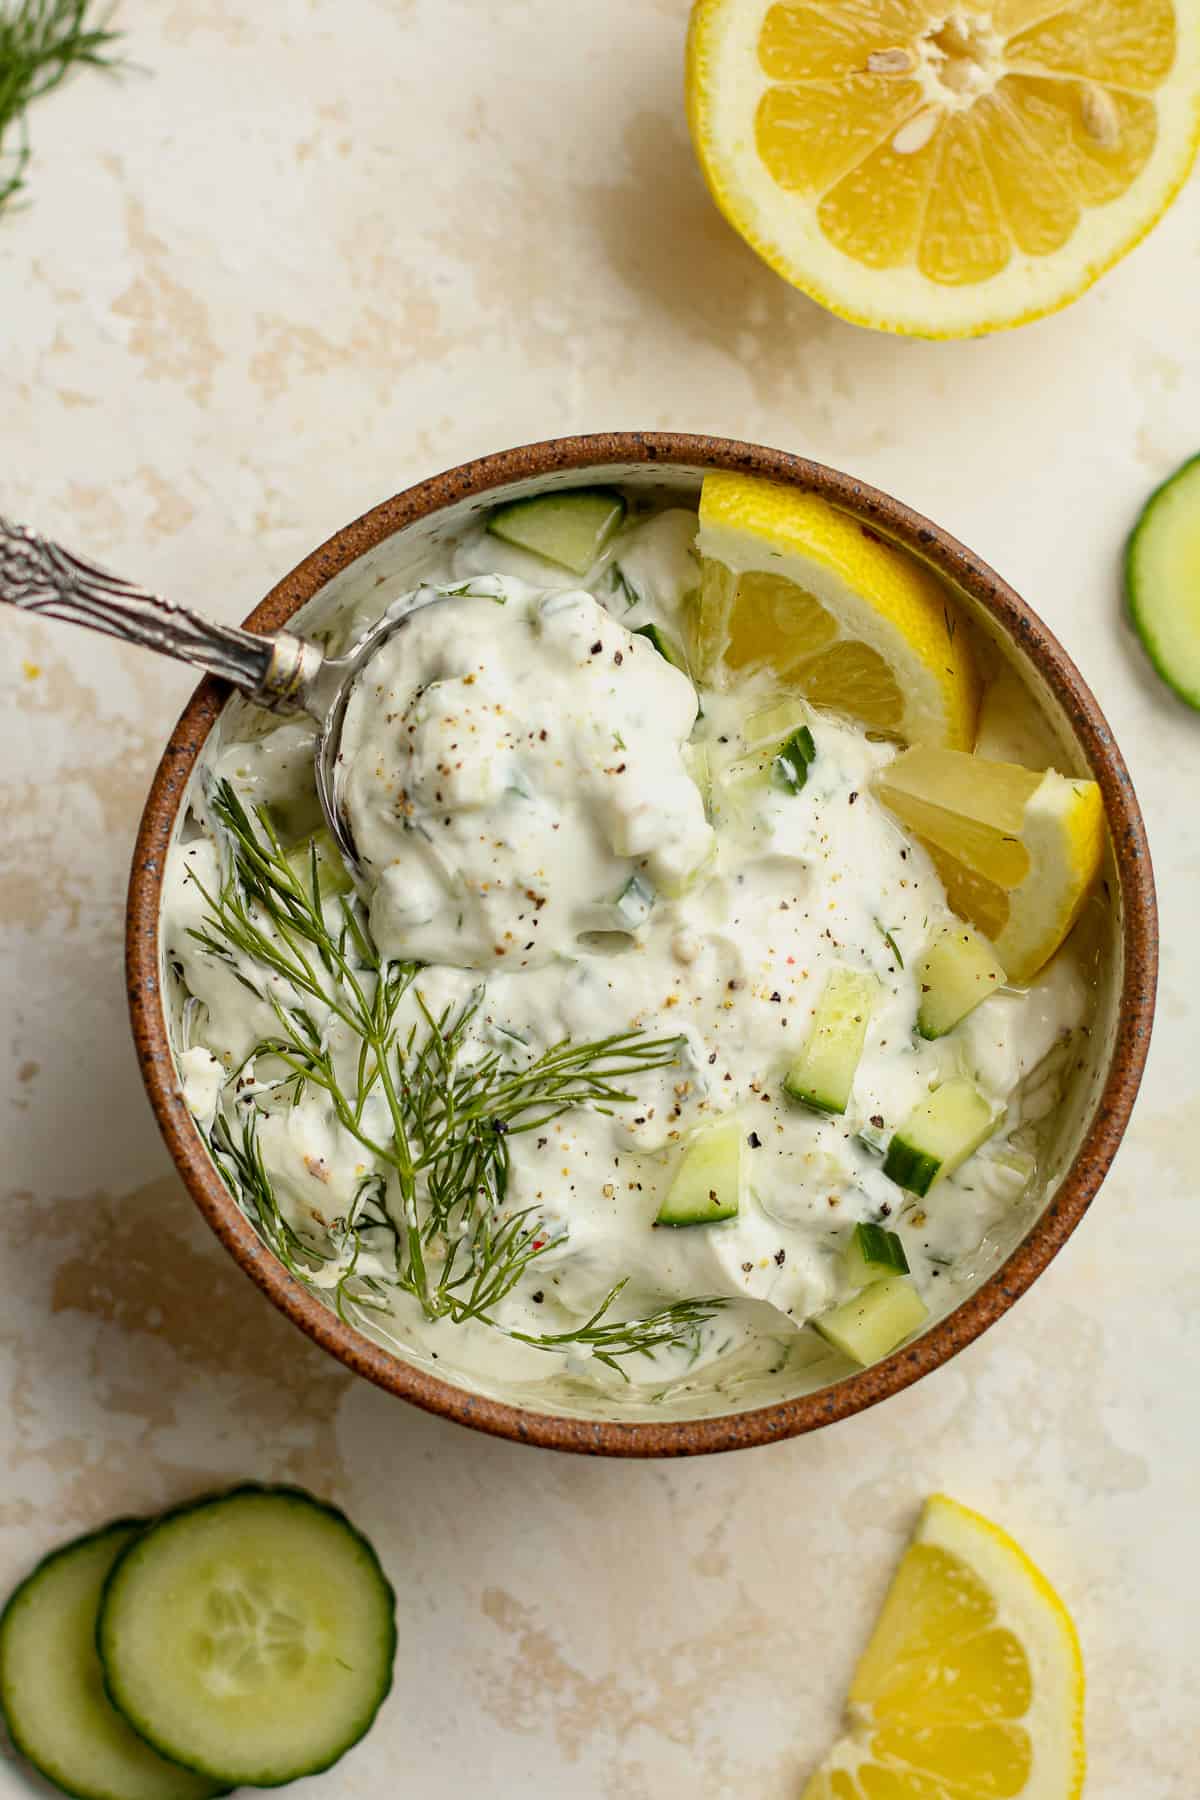 Overhead view of a bowl of tzatziki sauce.